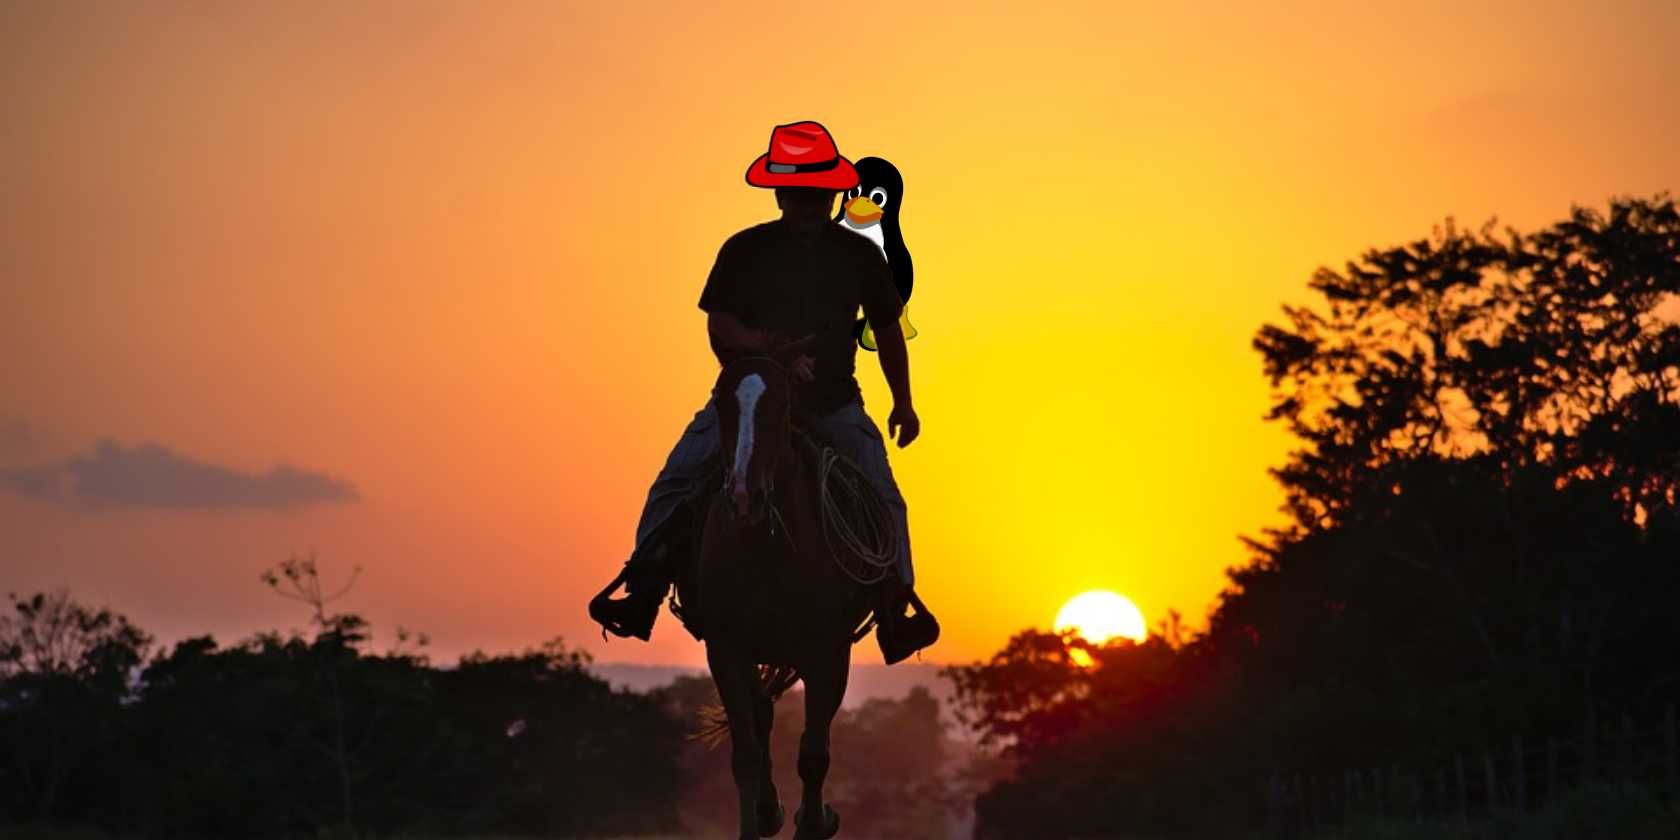 man riding a horse with red hat